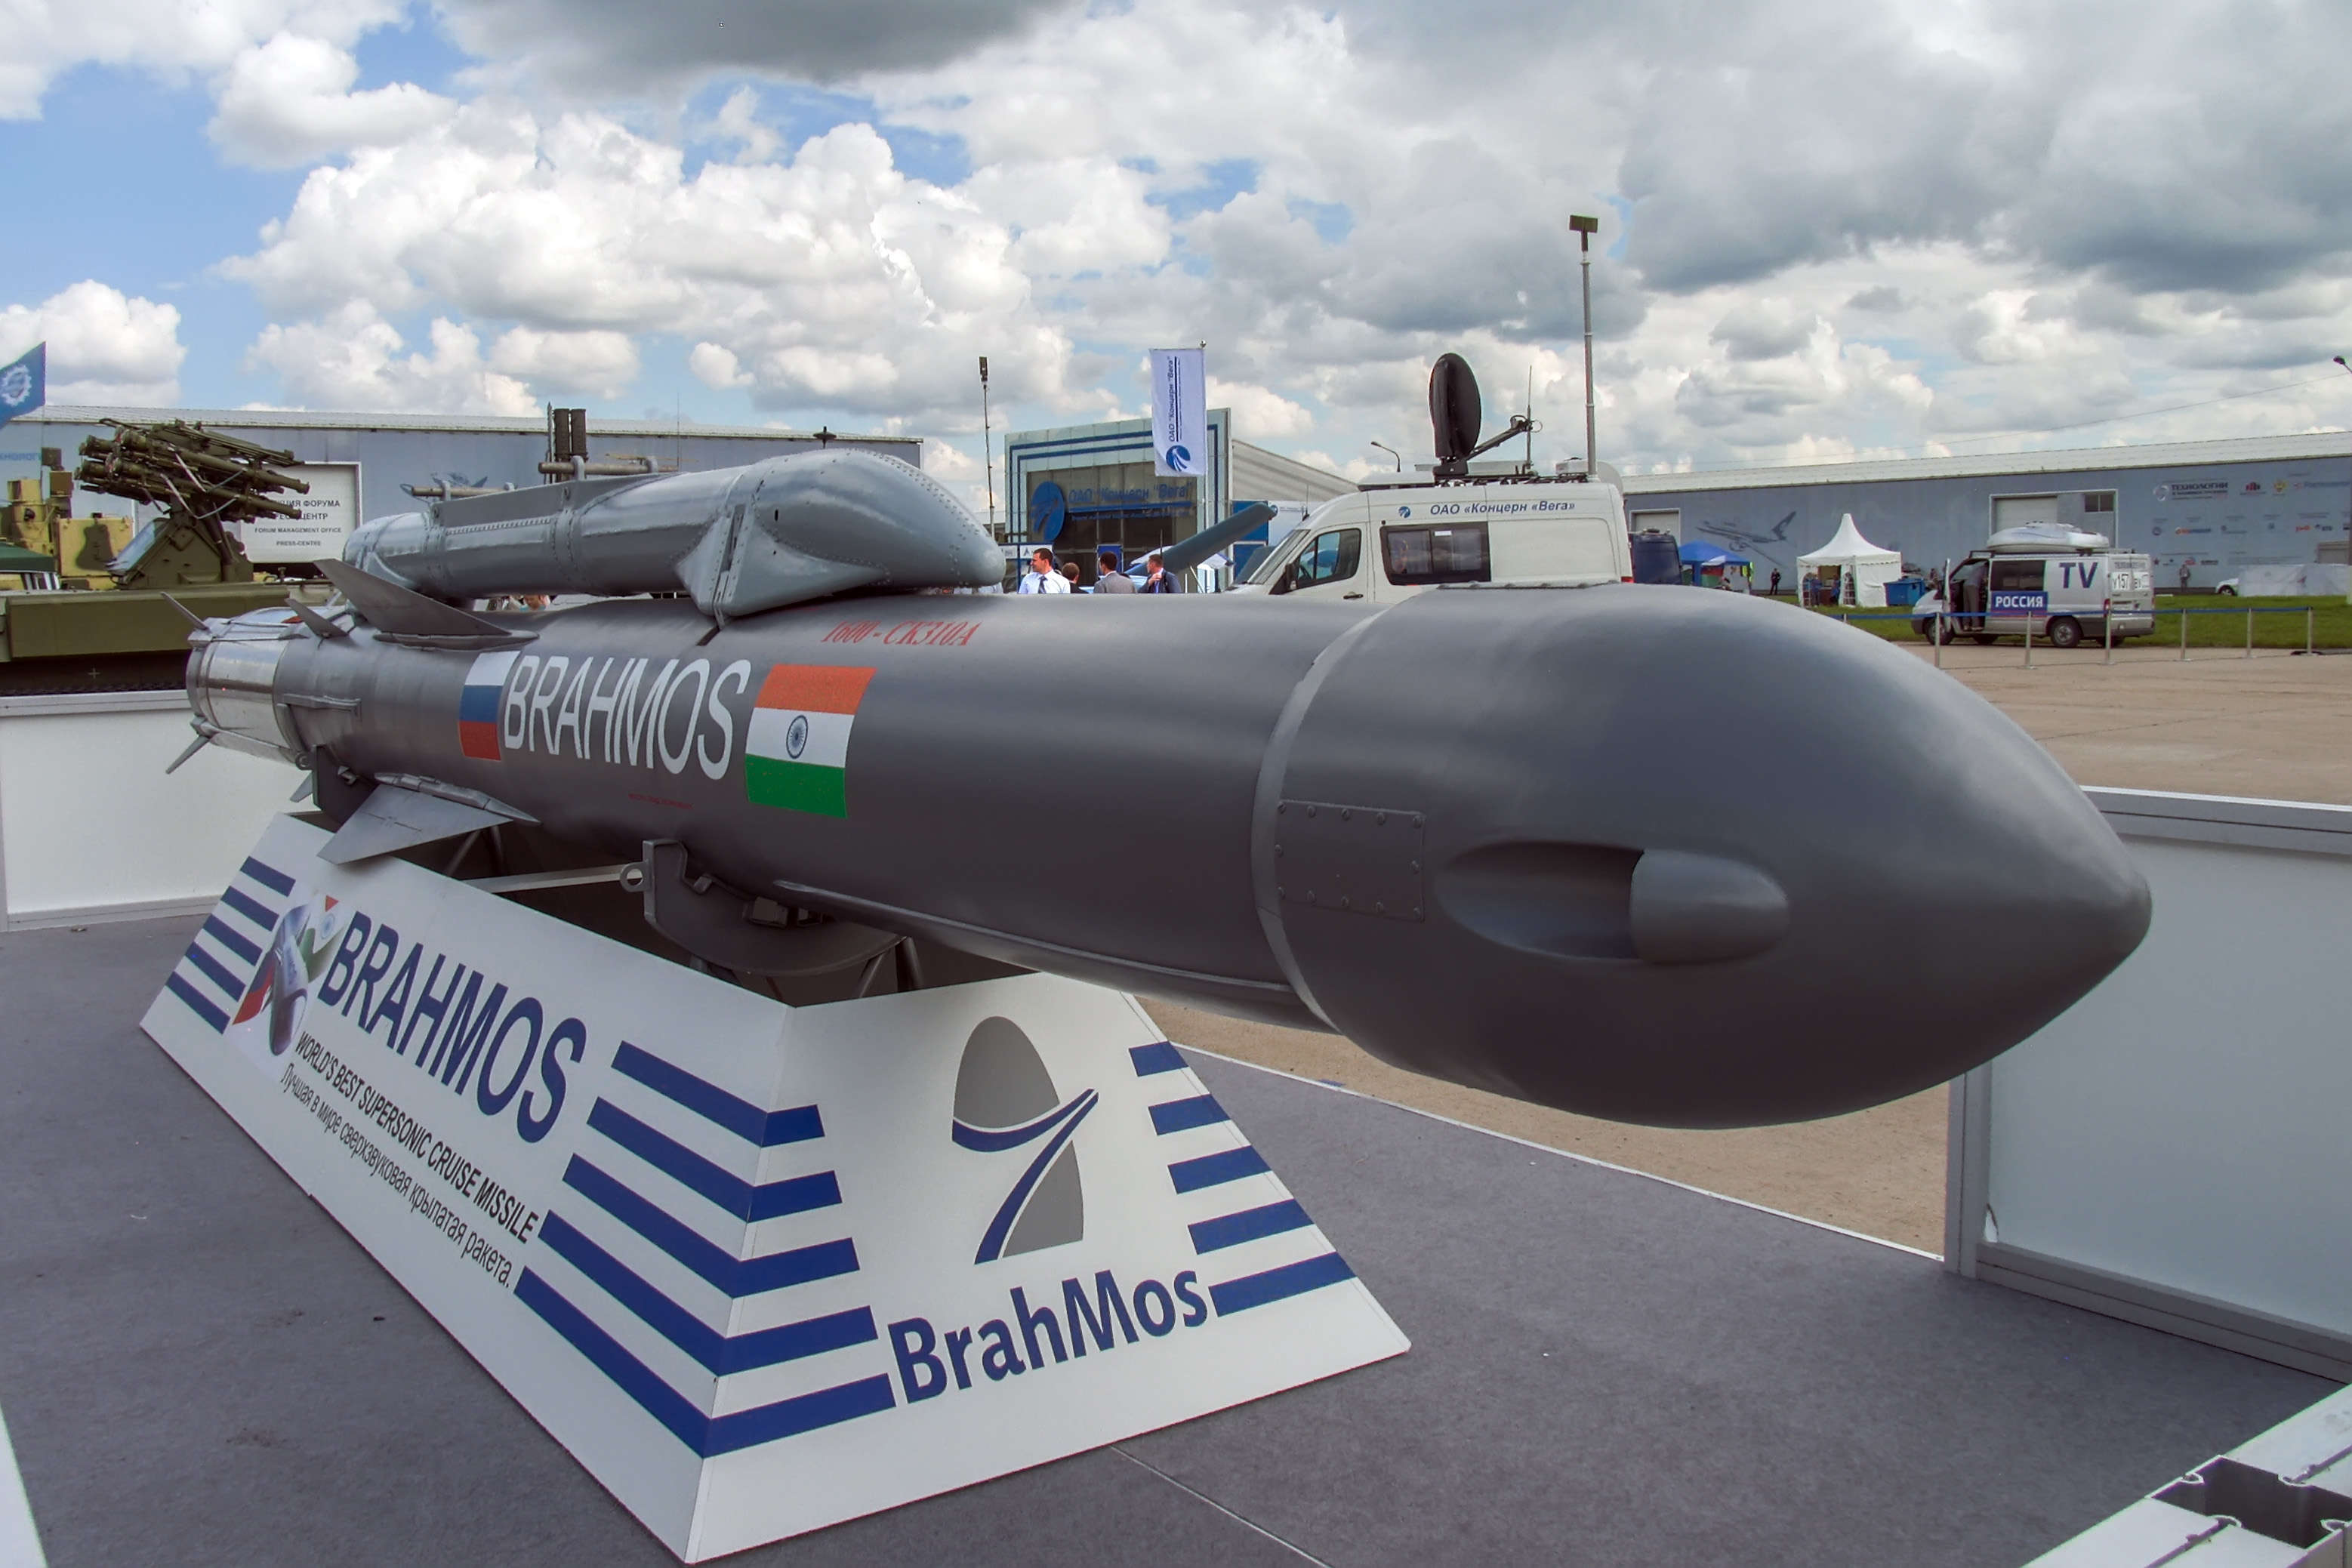 name the maiden international cruise missile of india